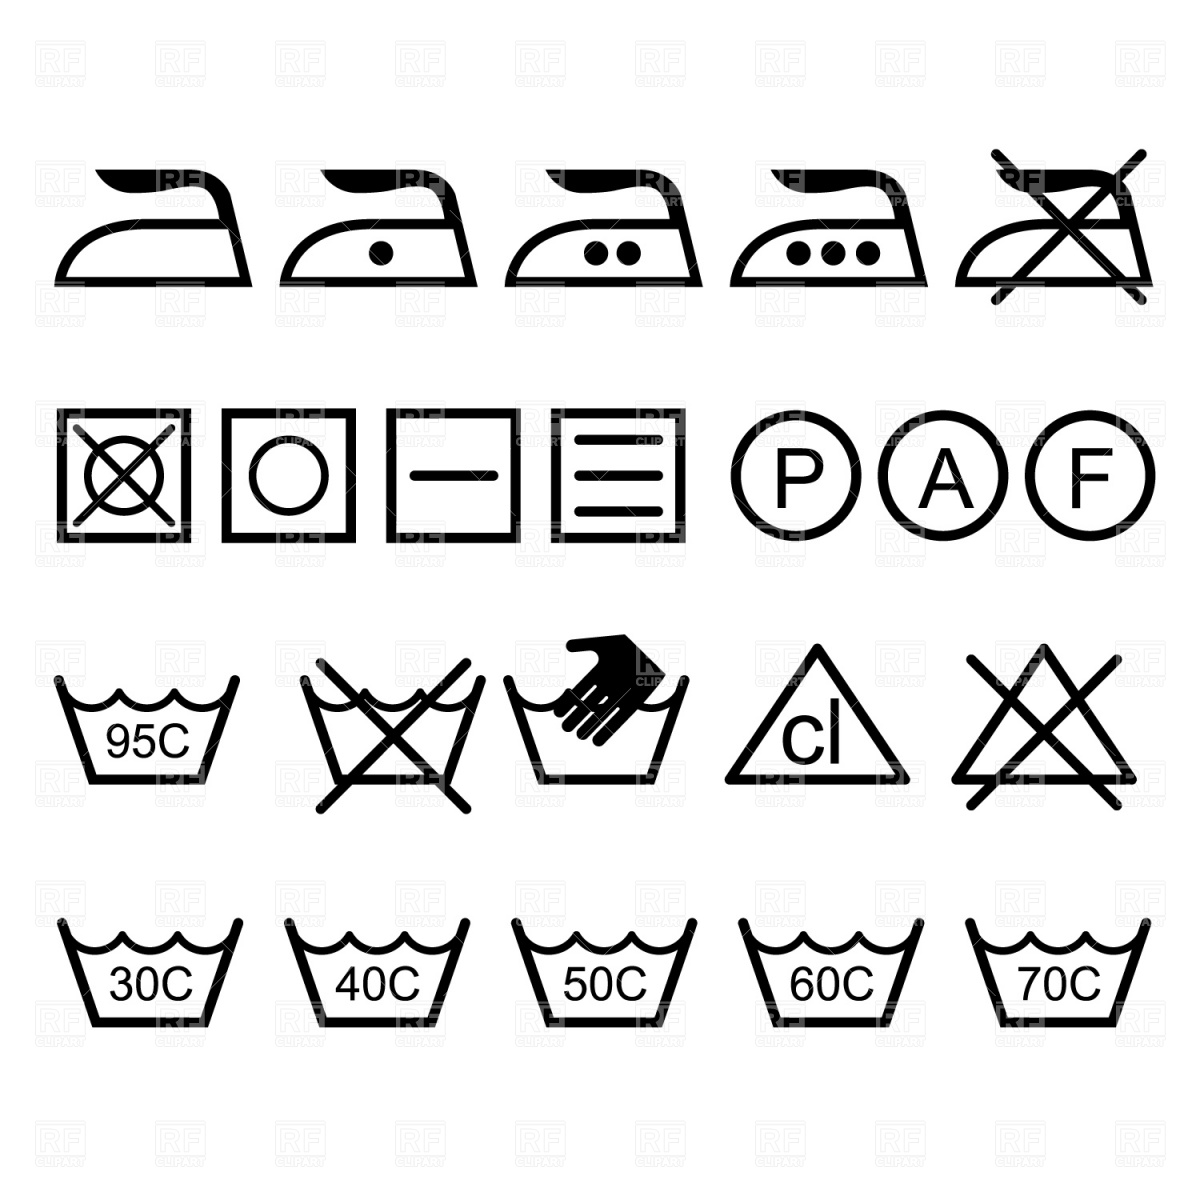 laundry-icons-Download-Royalty-free-Vector-File-EPS-2360